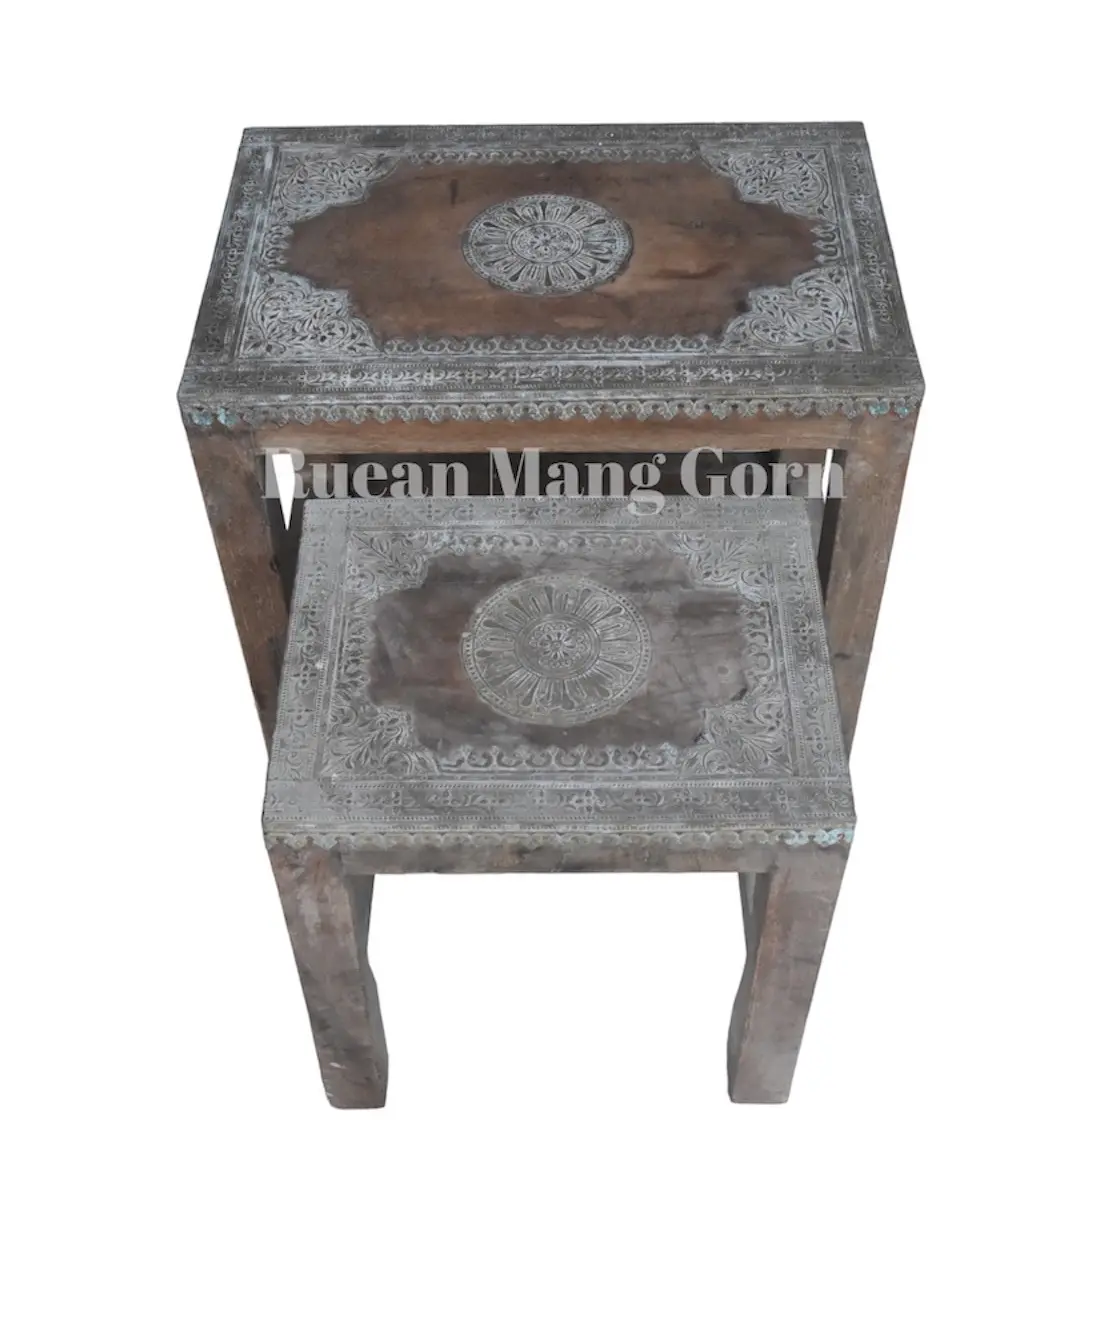 Vintage Pair Of Small Wooden Table With Brass Inlaid Decoration Craft Luxury Style Product Classic Hand Made Premium Quality